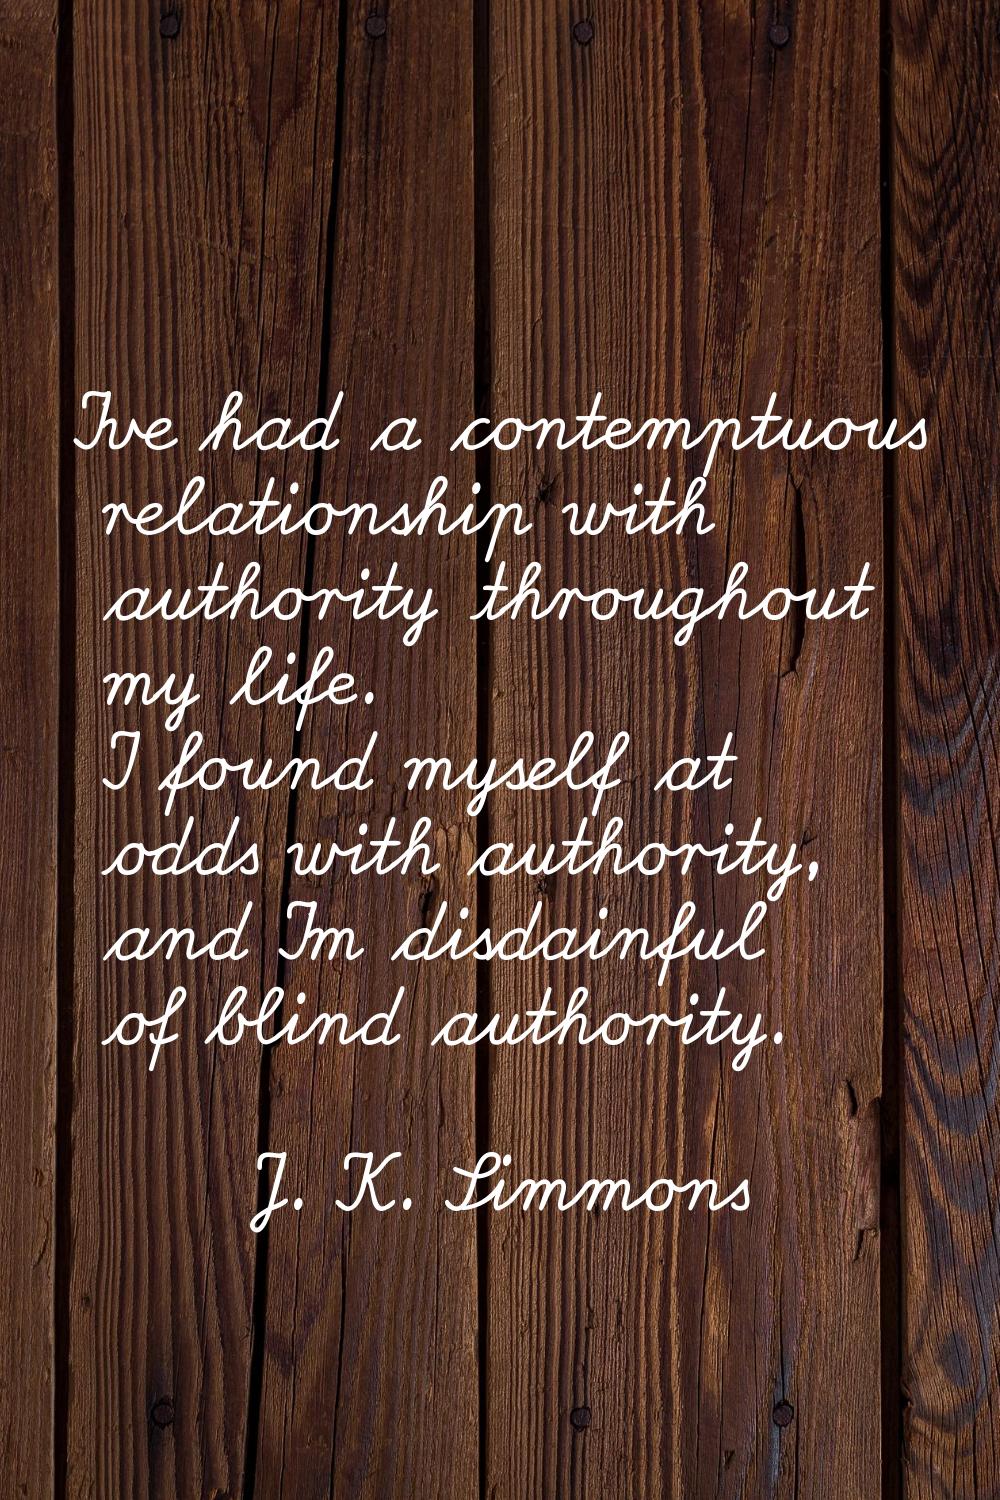 I've had a contemptuous relationship with authority throughout my life. I found myself at odds with